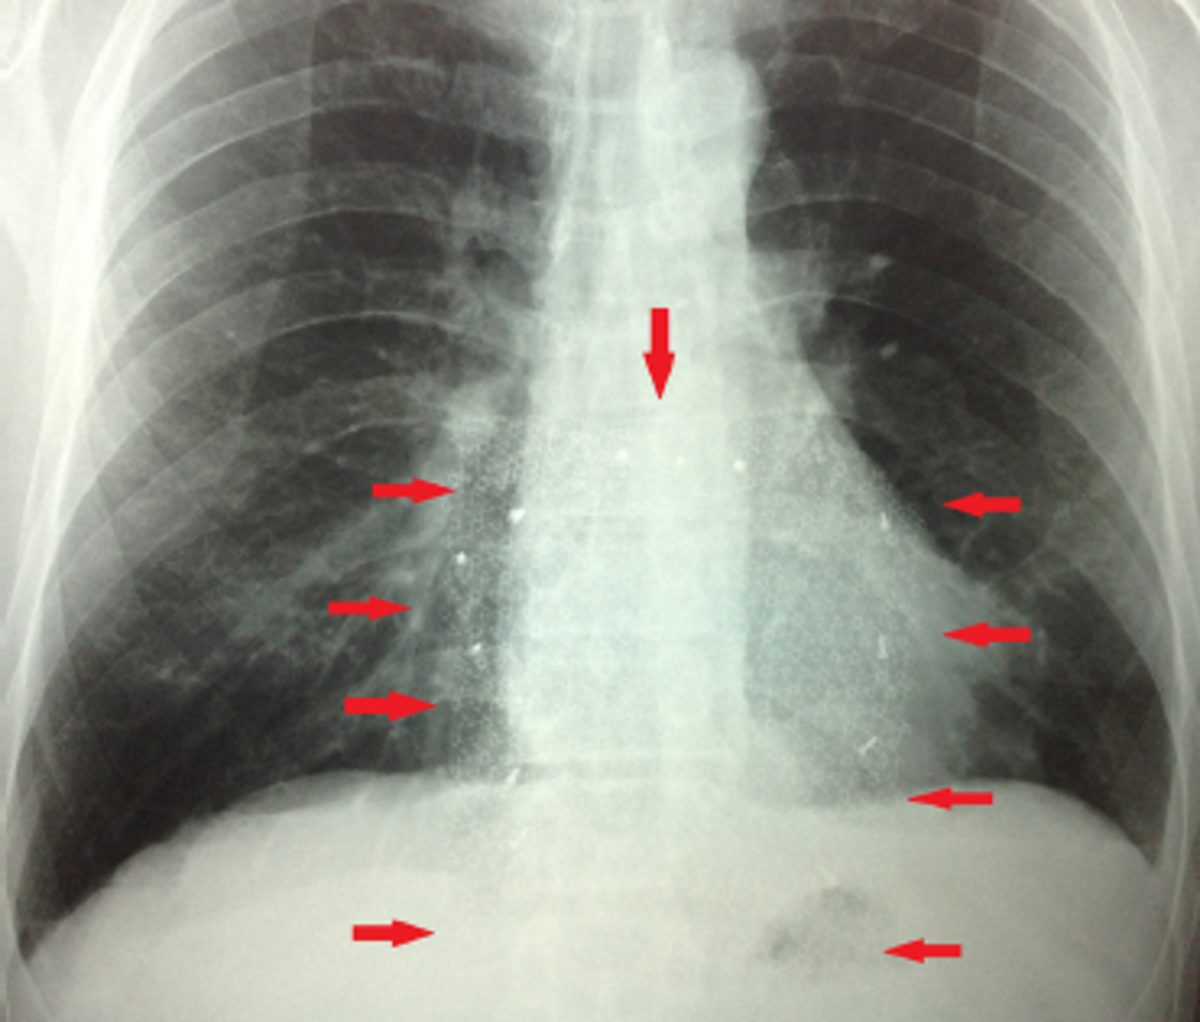 Surgical mesh can be seen during x-rays.